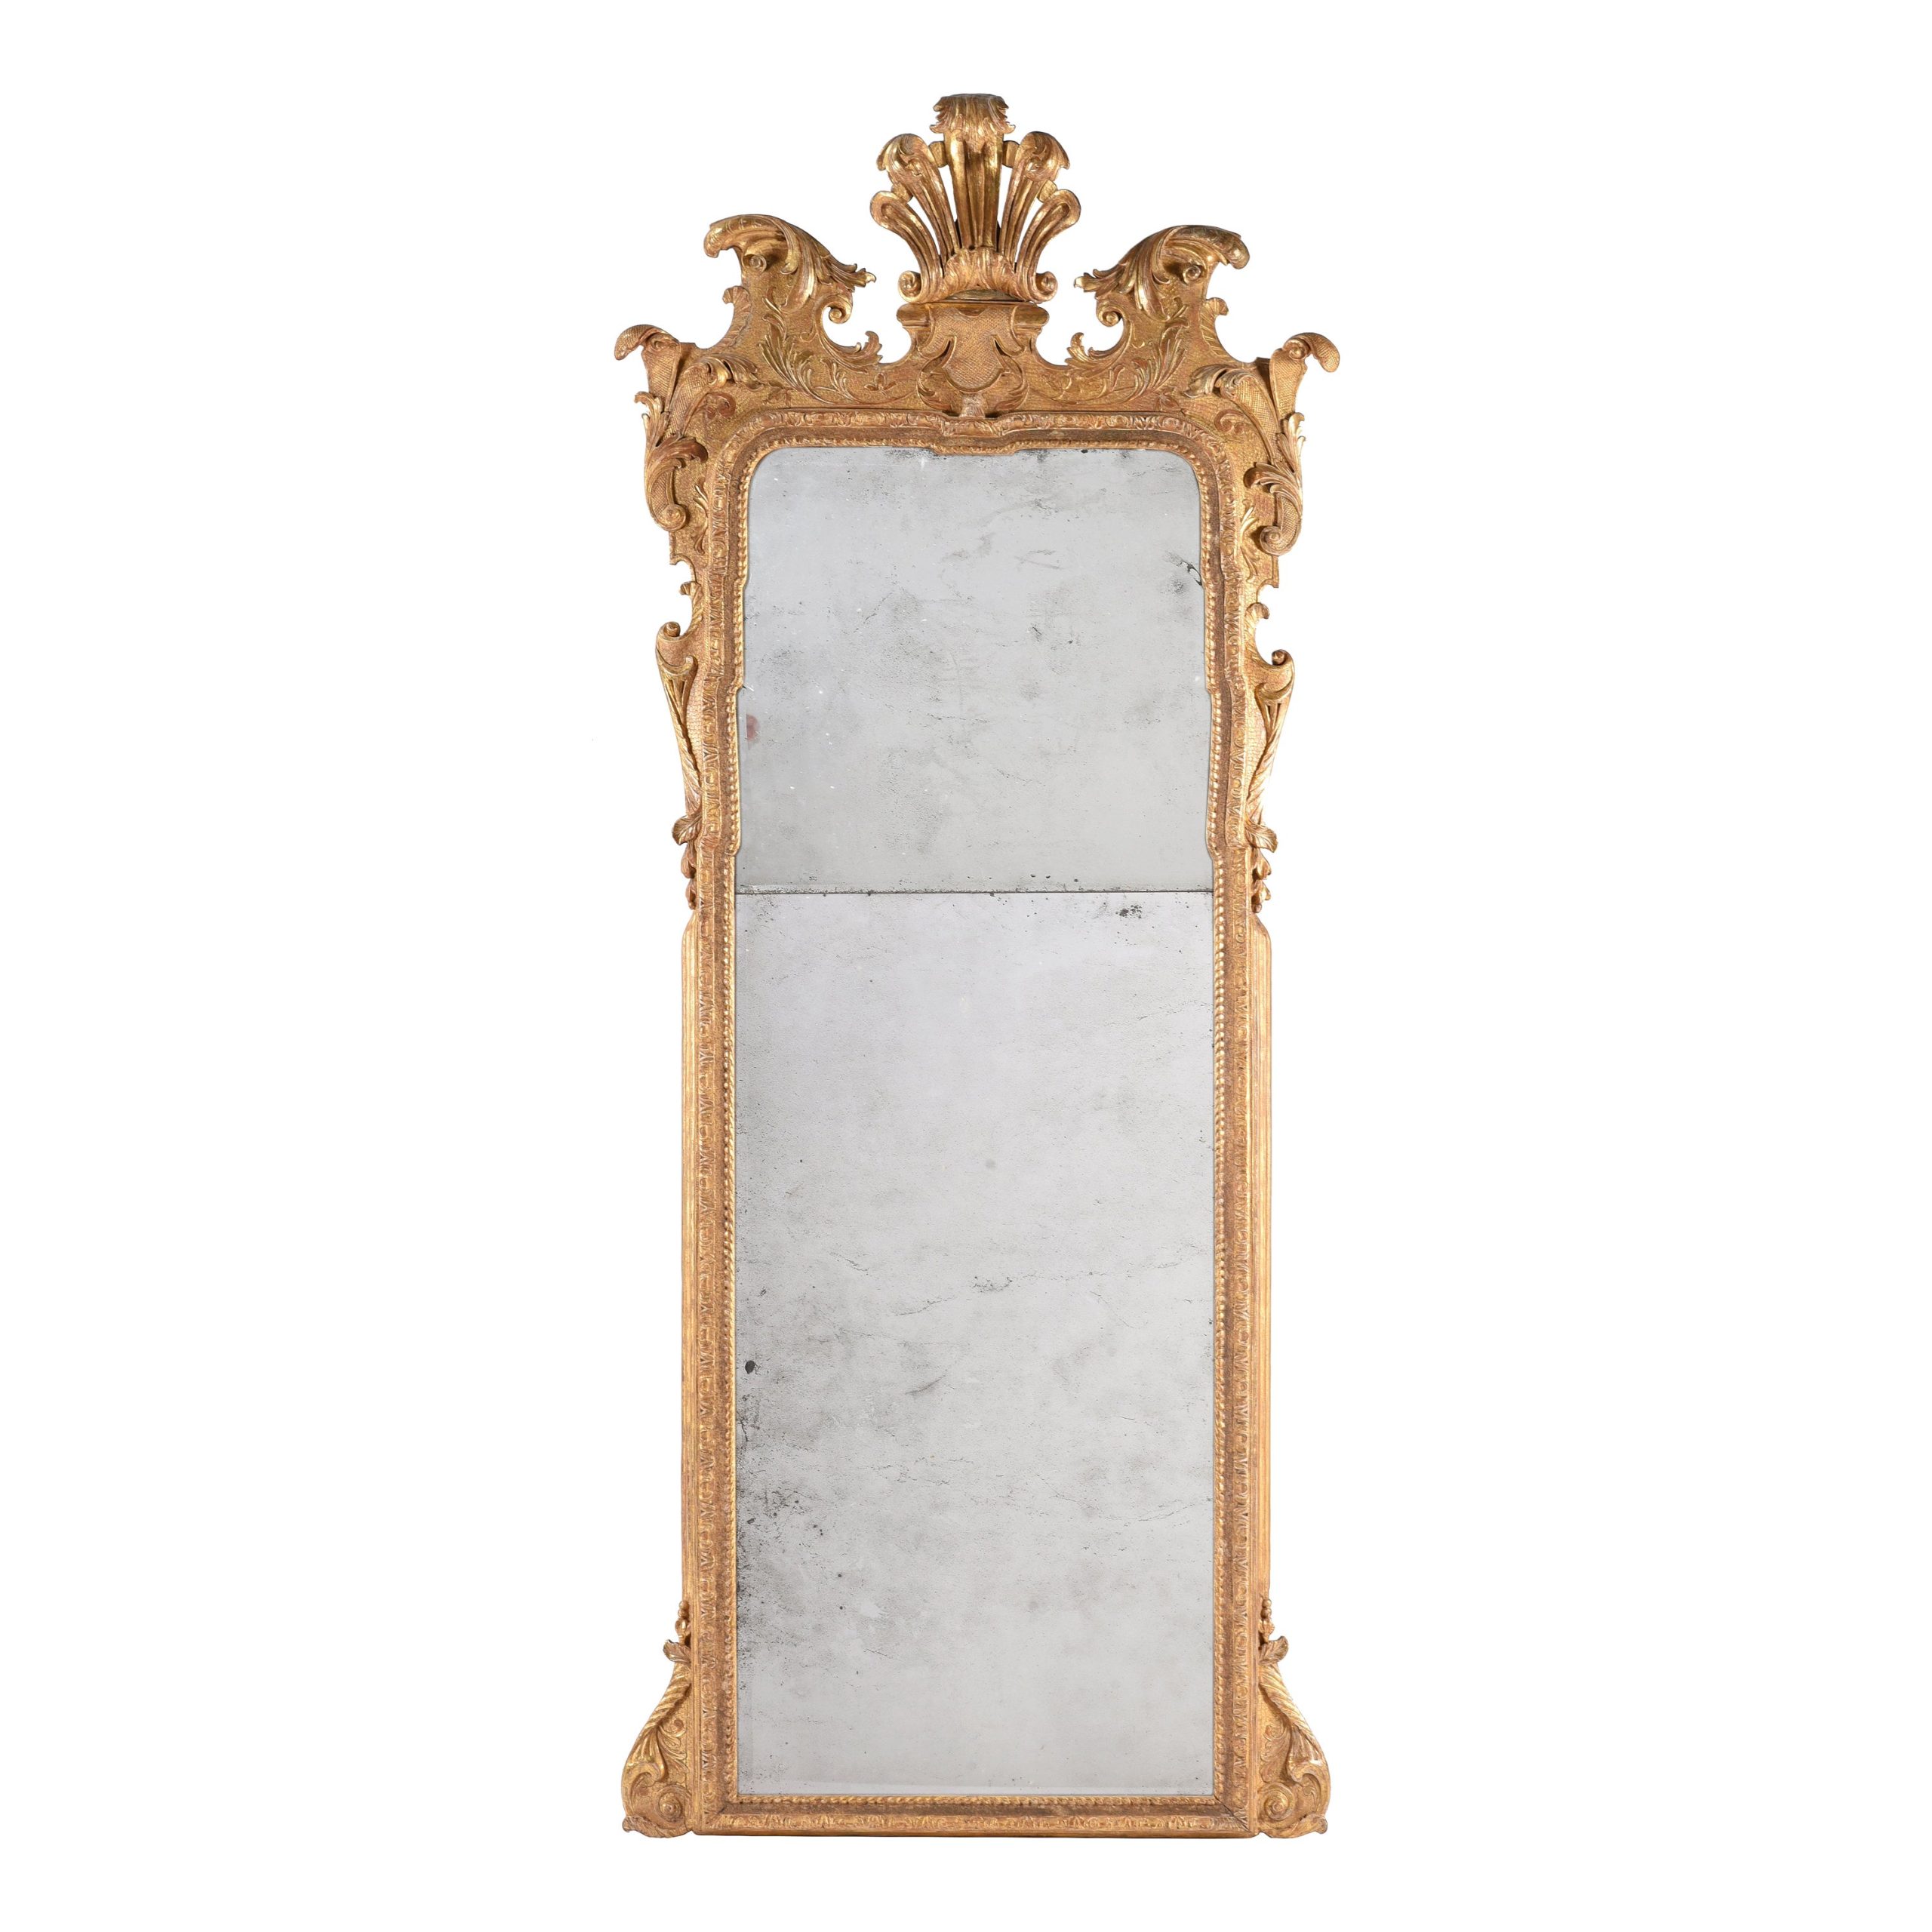 A Large 18th Century George I Gilt-Gesso Pier Glass, Attributed to John Belchier 1